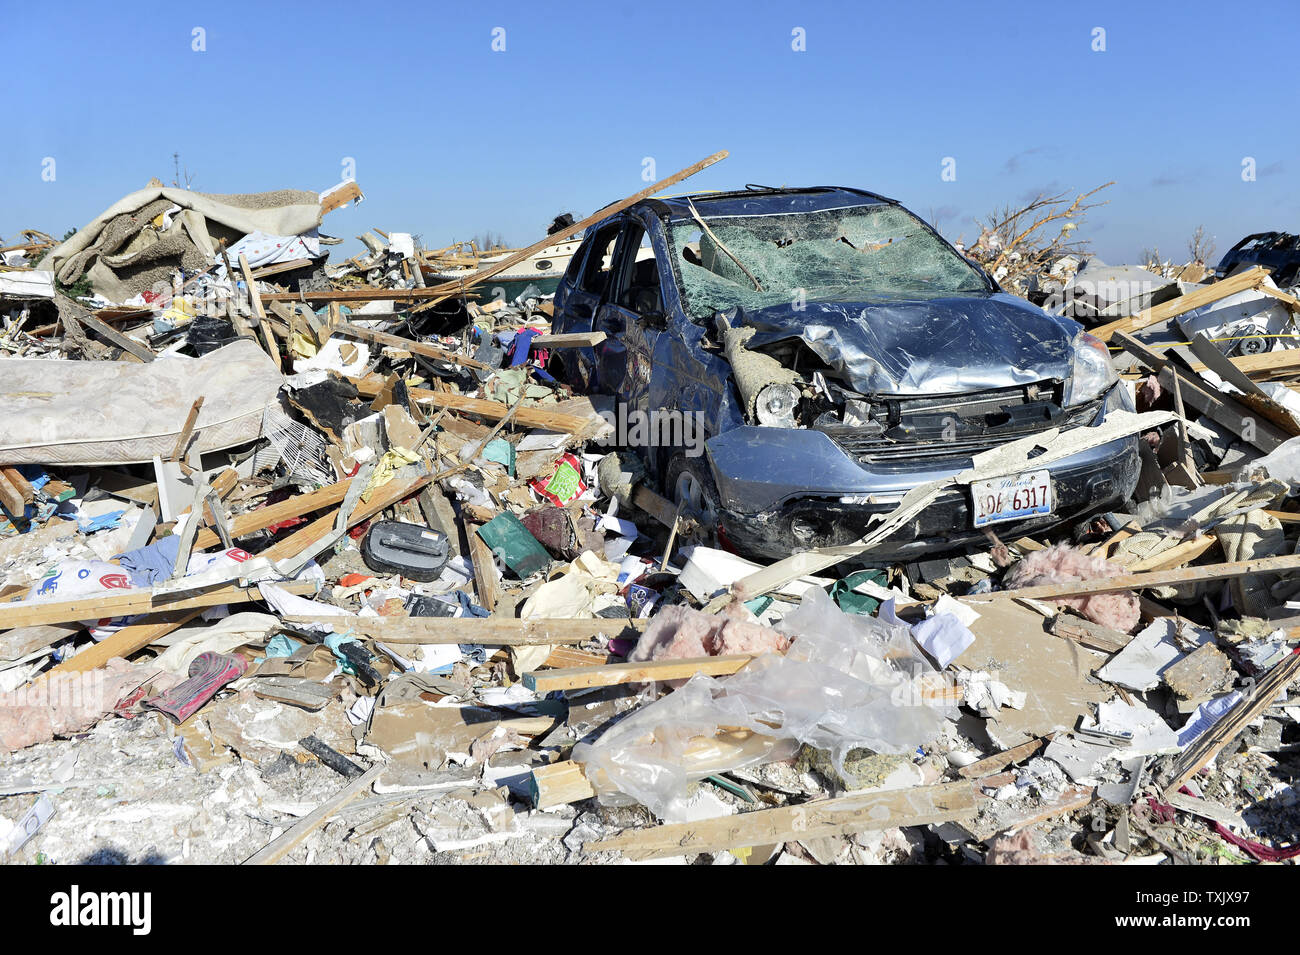 A car rests where they it was thrown by a tornado in Washington, Illinois on November 18, 2013. Six people died and hundreds of homes were destroyed in Illinois as 81 tornadoes were sighted on November 17 throughout 12 midwest states including the EF4 tornado that struck Washington, Illinois.     UPI/Brian Kersey.     UPI/Brian Kersey Stock Photo